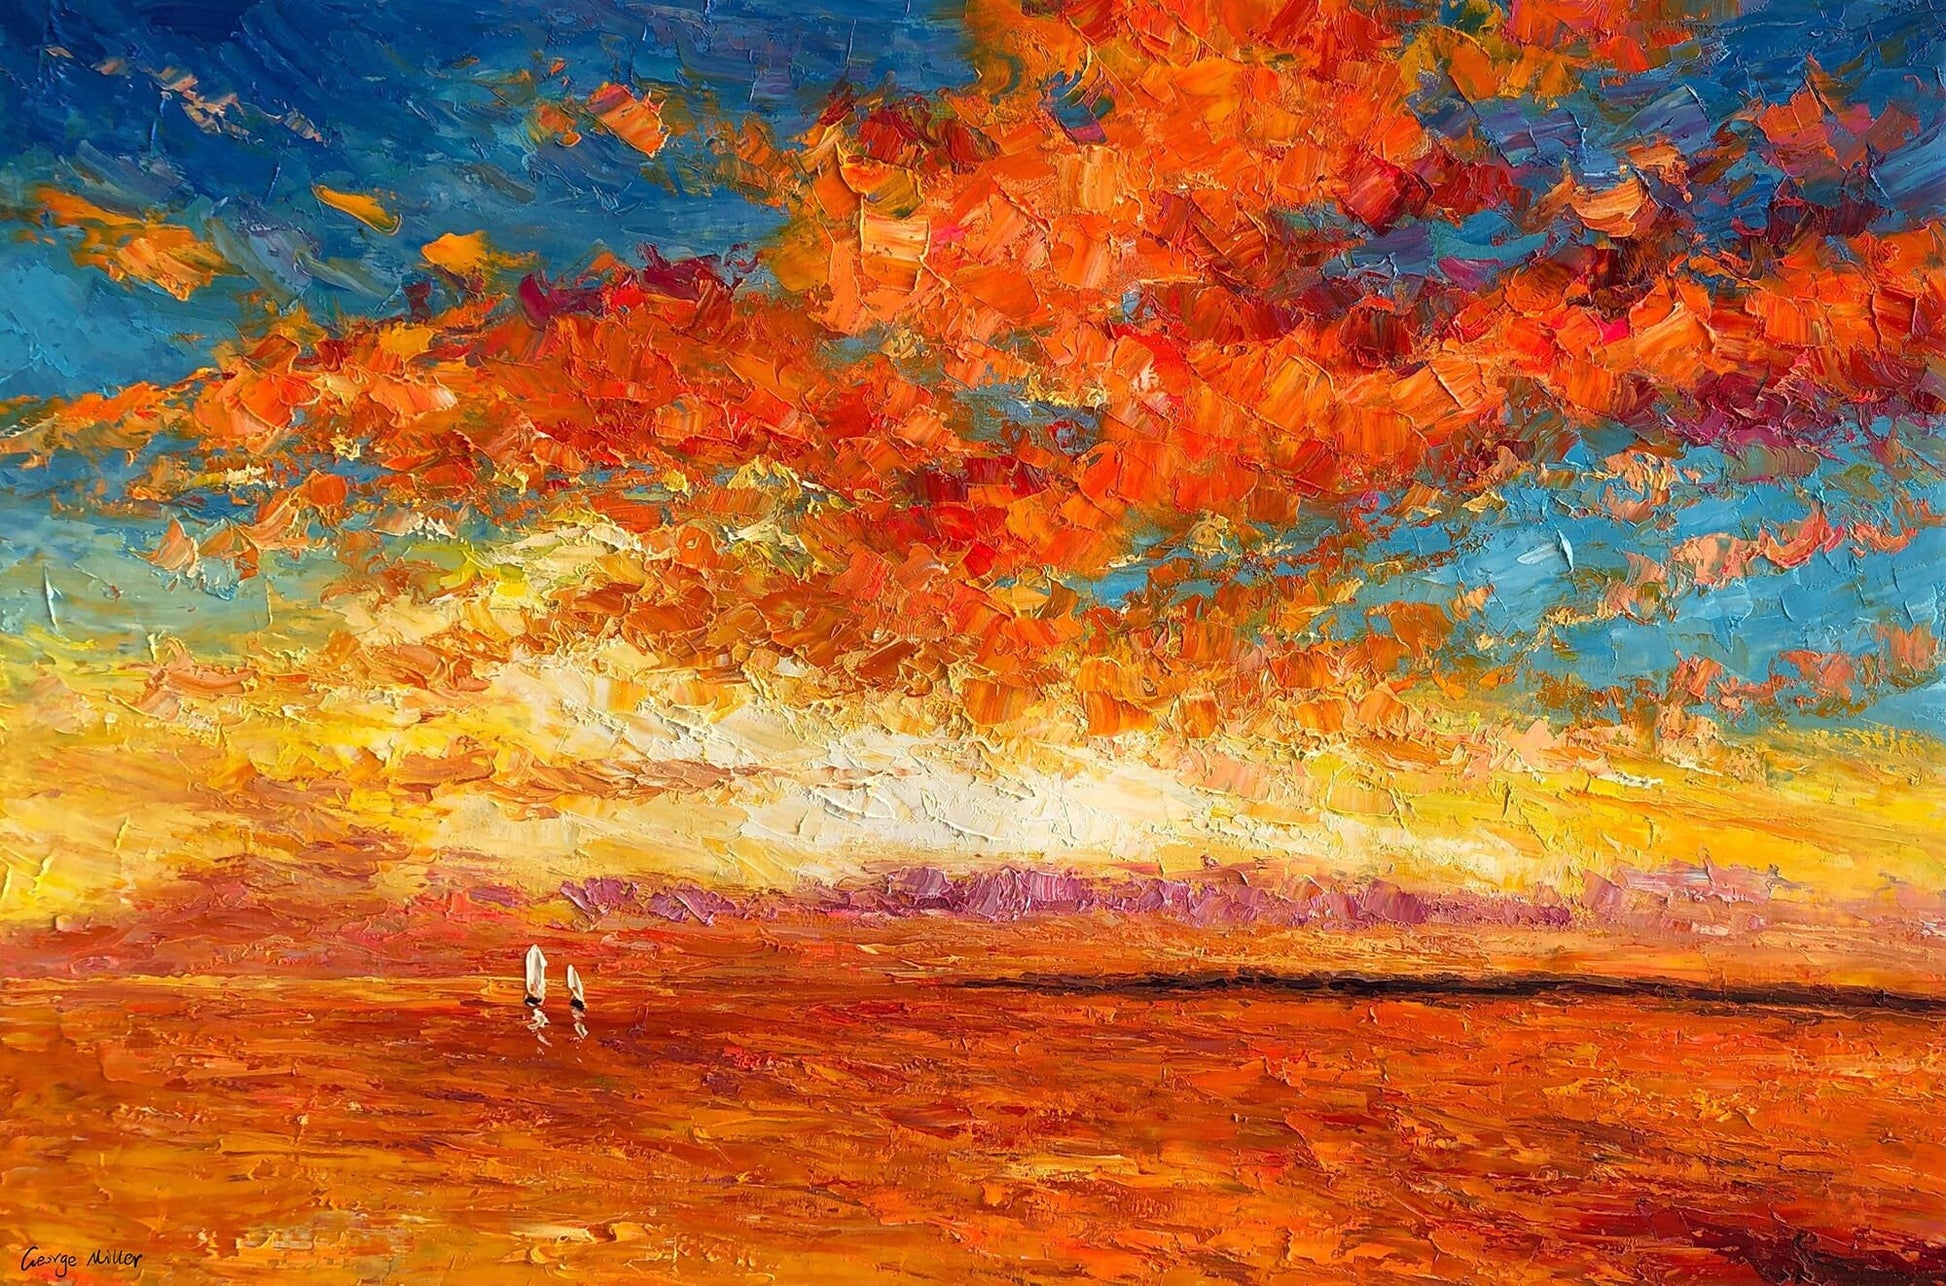 Pacific Sunset Oil Painting - Original Seascape Art - Fine Wall Decor - Oversized Canvas - Ready to Hang